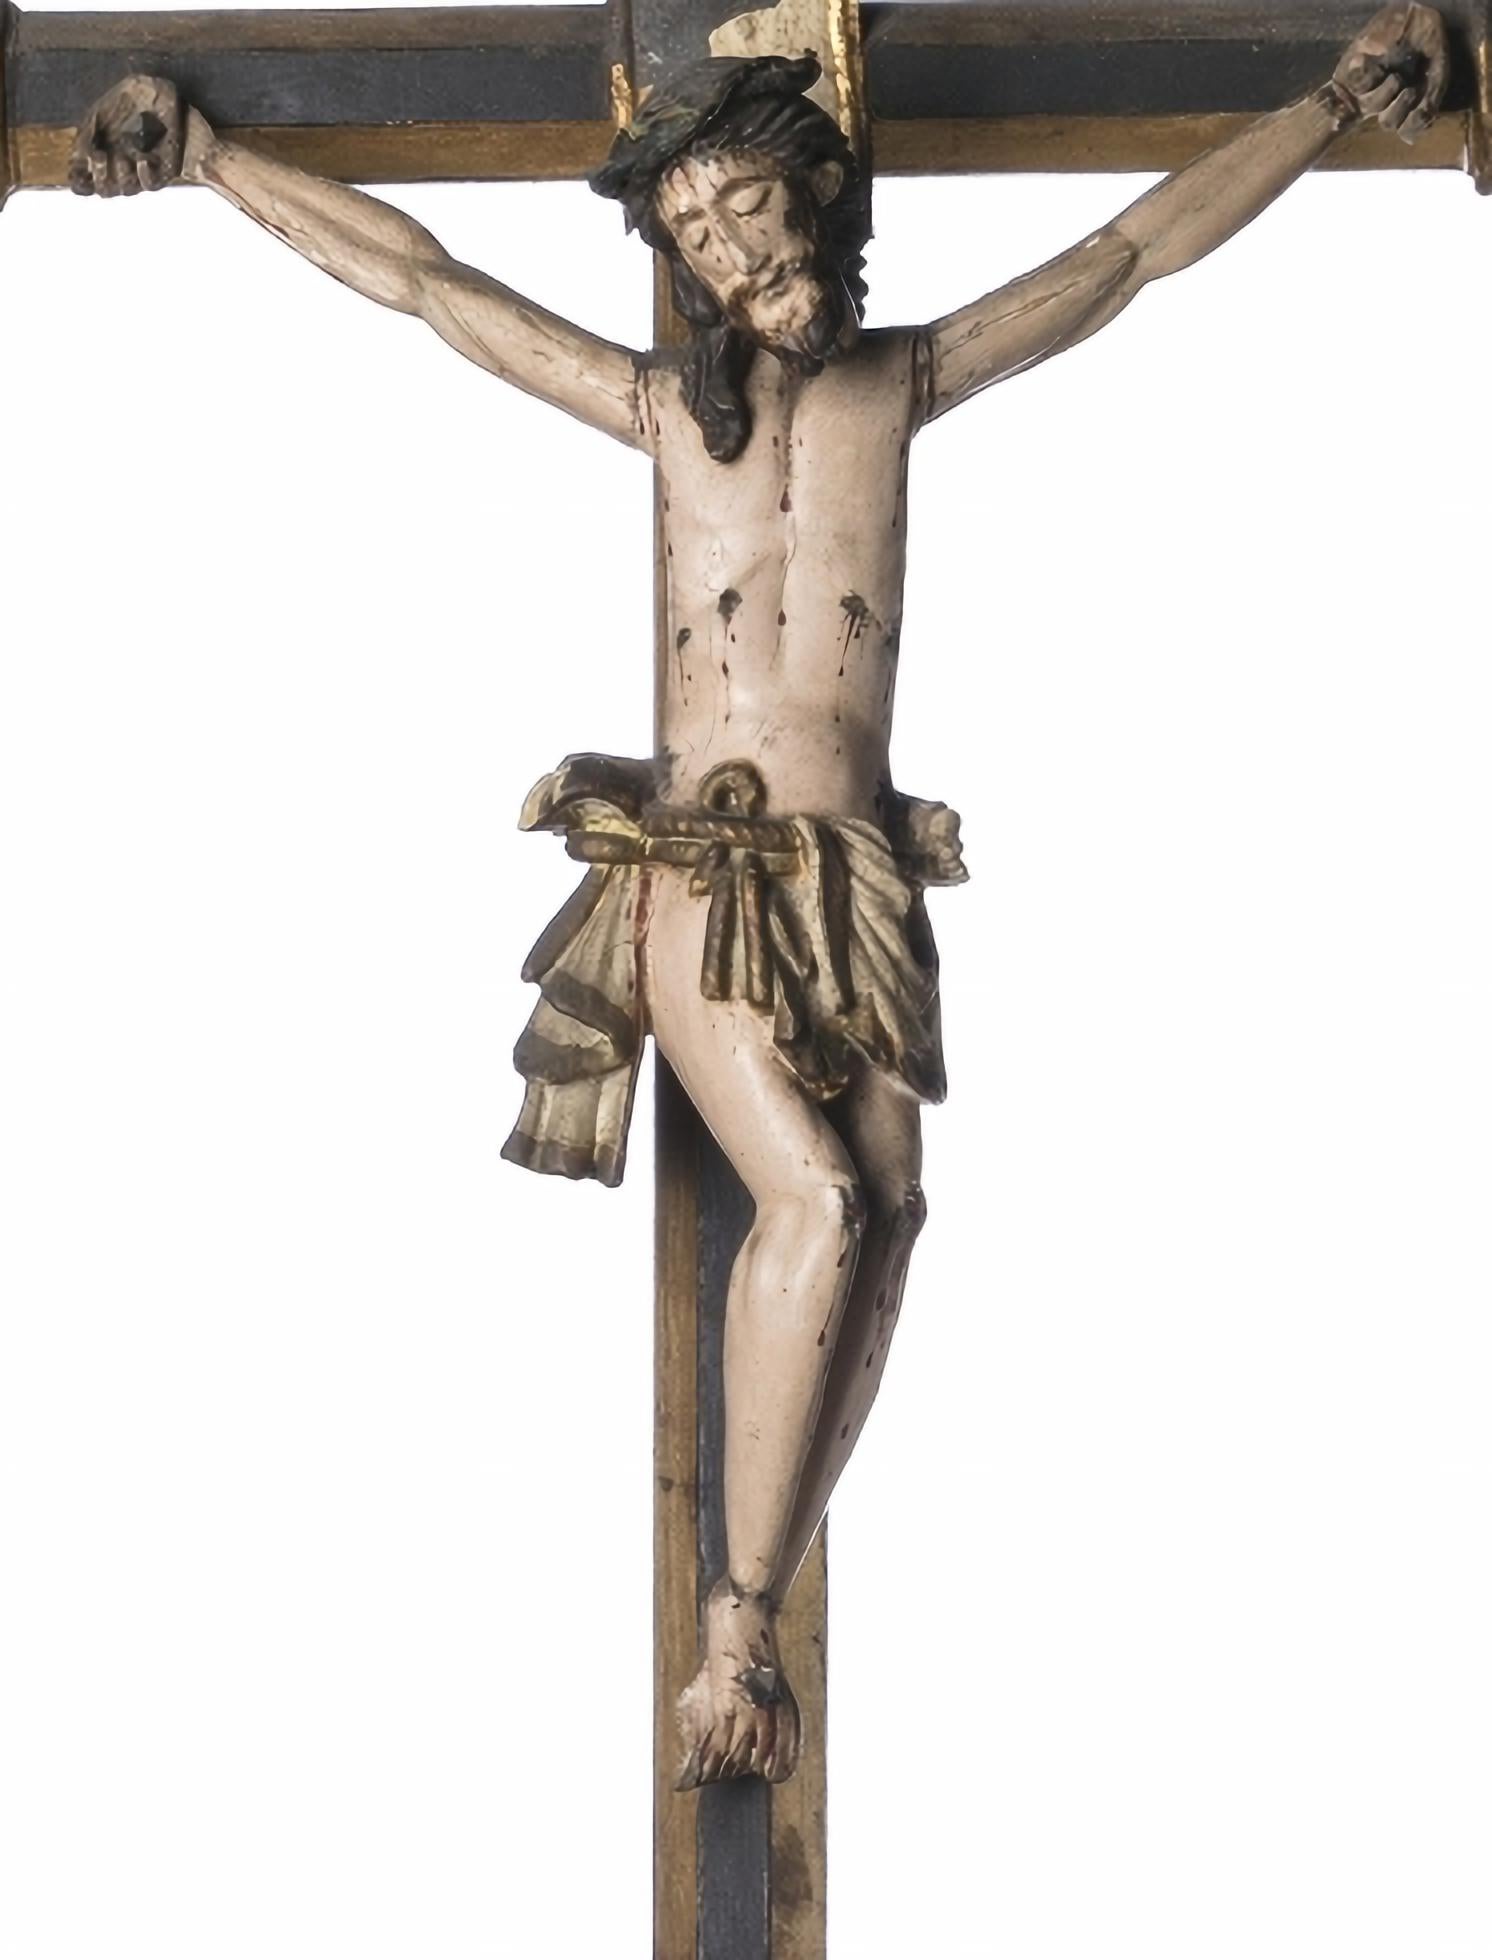 JESUS CHRIST CRUCIFIED

17th Century Portuguese sculpture
in carved wood, polychrome and gilded.
Small flaws in the polychromy.
Height: (Christ) 32 cm. Height: (total) 86 cm.
good conditions
